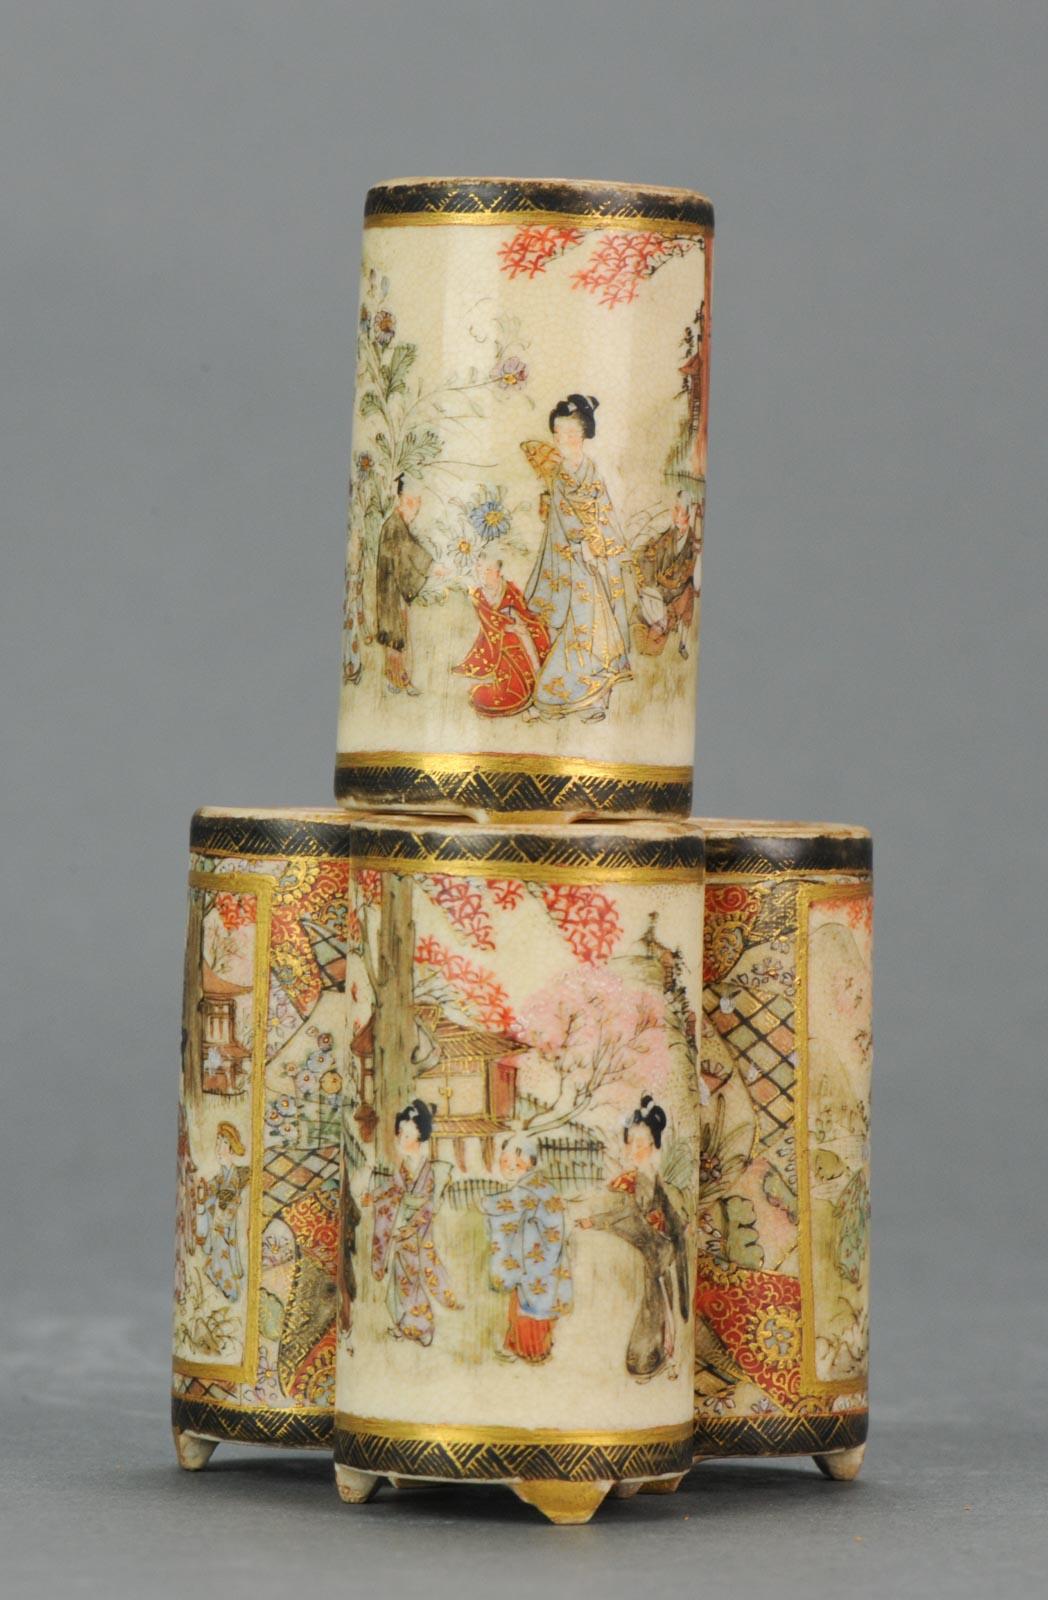 Lovely detailed pieces. Marked on base.

Additional information:
Material: Porcelain & Pottery
Region of Origin: Japan
Period: Meiji Periode (1867-1912)
Age: ca 1900
Original/Reproduction: Original
Condition: Overall Condition C (Used) Rimfritting,